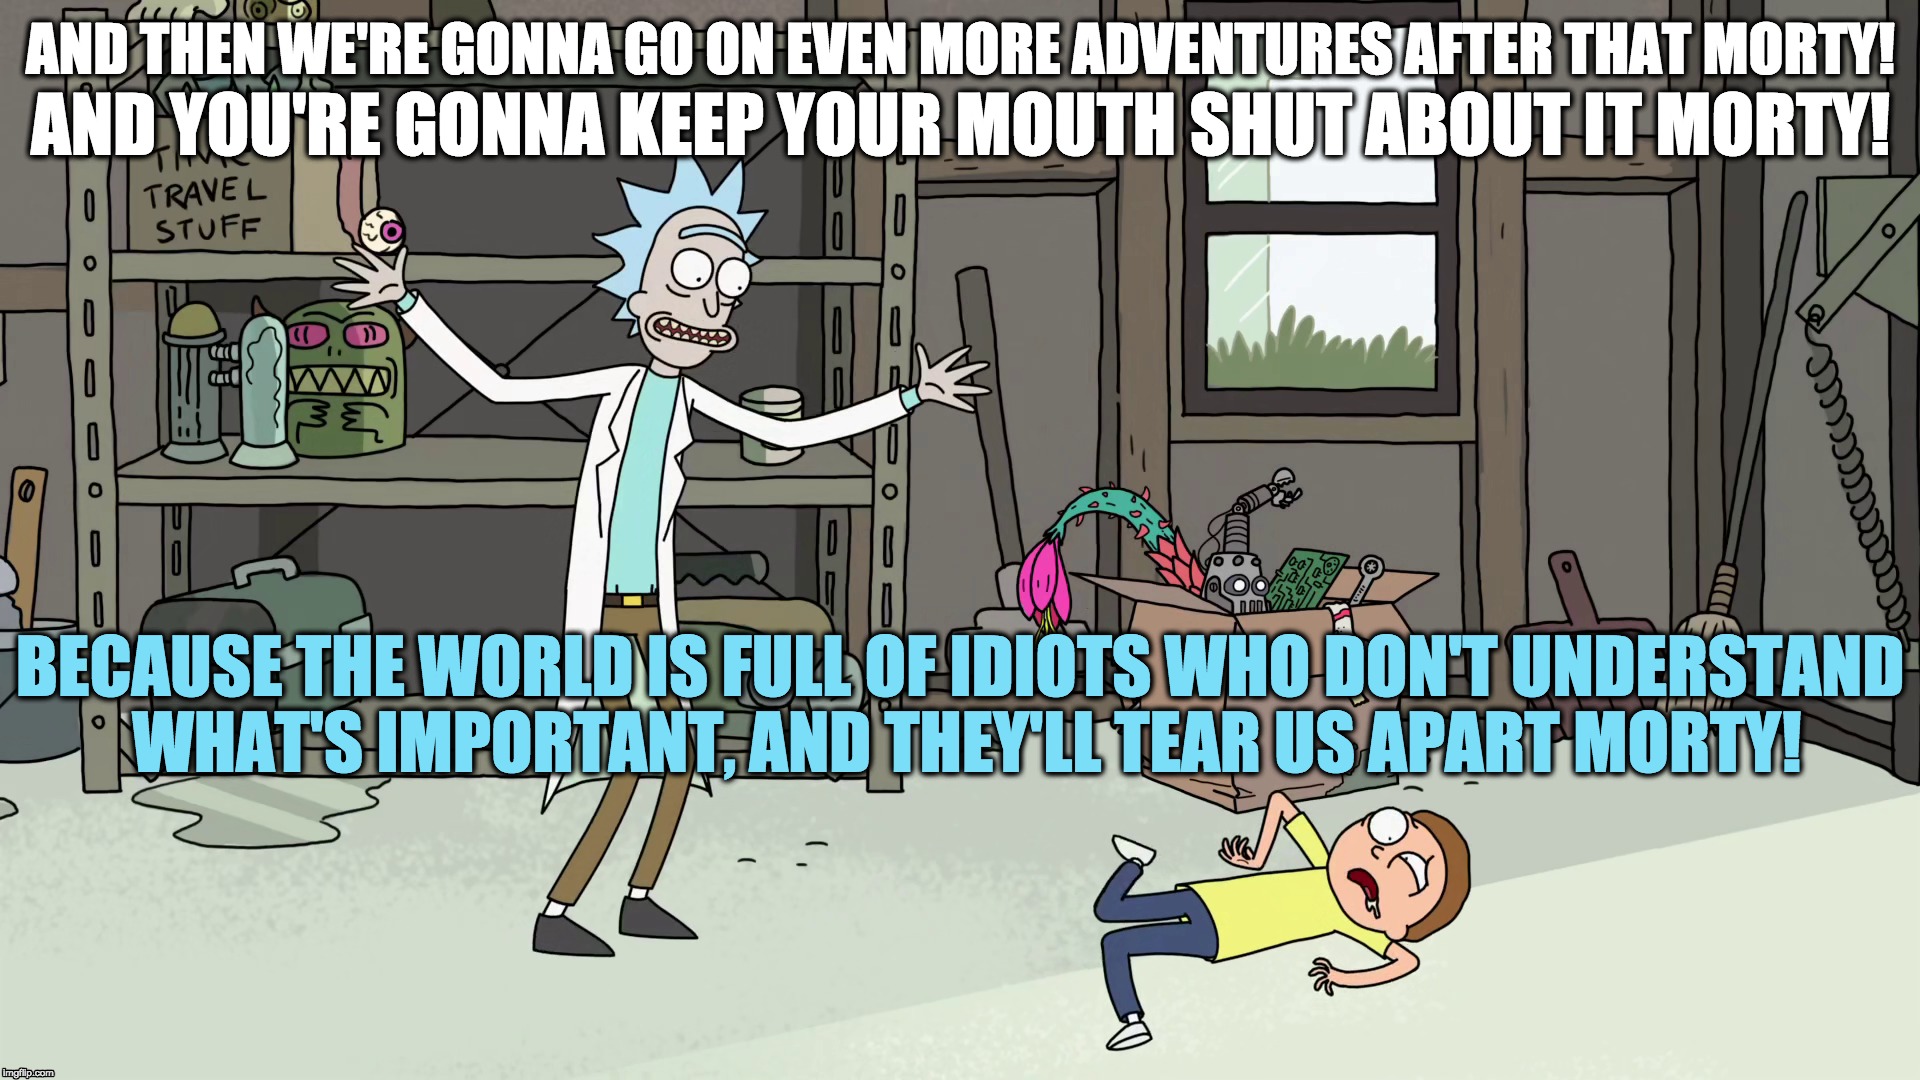 IDIOTS | AND THEN WE'RE GONNA GO ON EVEN MORE ADVENTURES AFTER THAT MORTY! AND YOU'RE GONNA KEEP YOUR MOUTH SHUT ABOUT IT MORTY! BECAUSE THE WORLD IS FULL OF IDIOTS WHO DON'T UNDERSTAND WHAT'S IMPORTANT, AND THEY'LL TEAR US APART MORTY! | image tagged in rick and morty | made w/ Imgflip meme maker